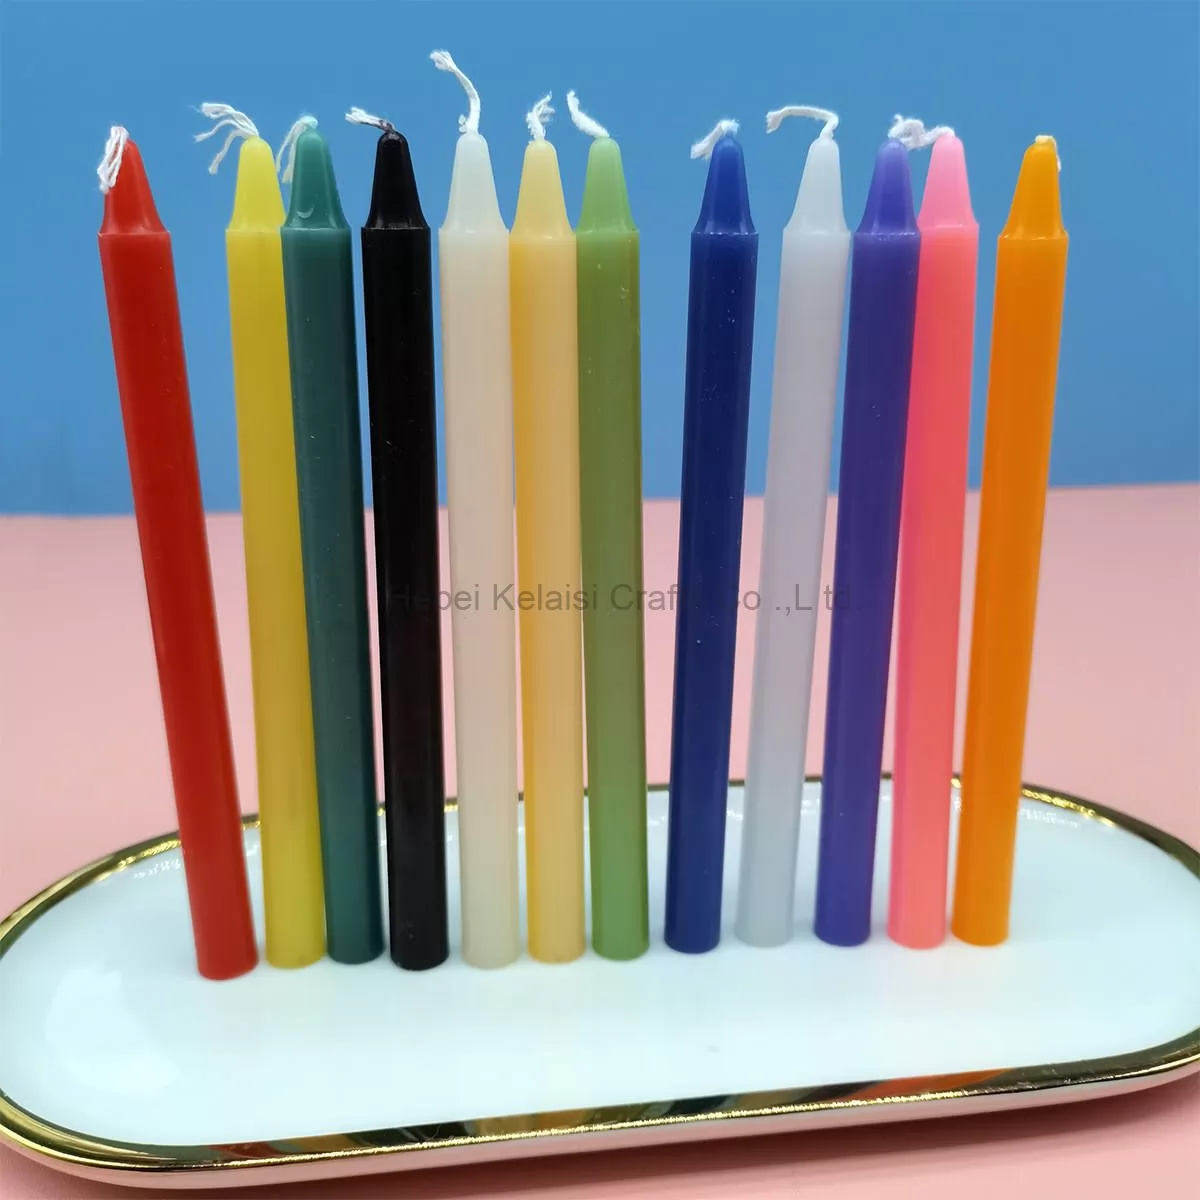 Handmade Large Color Pillar Happy Party Cake Spiral Birthday Candles